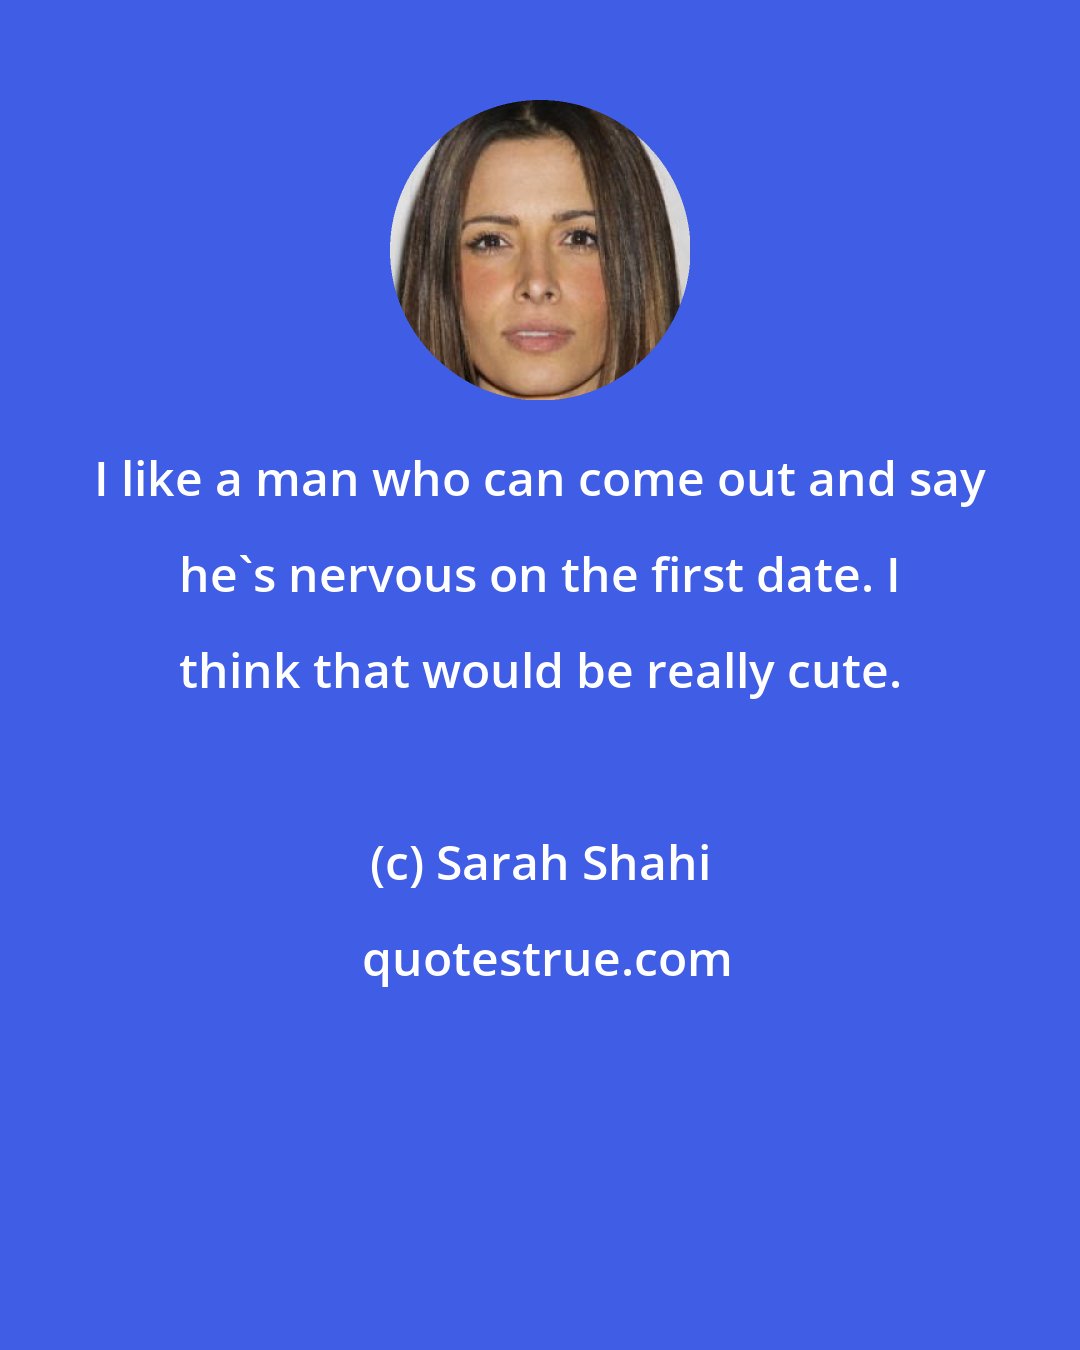 Sarah Shahi: I like a man who can come out and say he's nervous on the first date. I think that would be really cute.